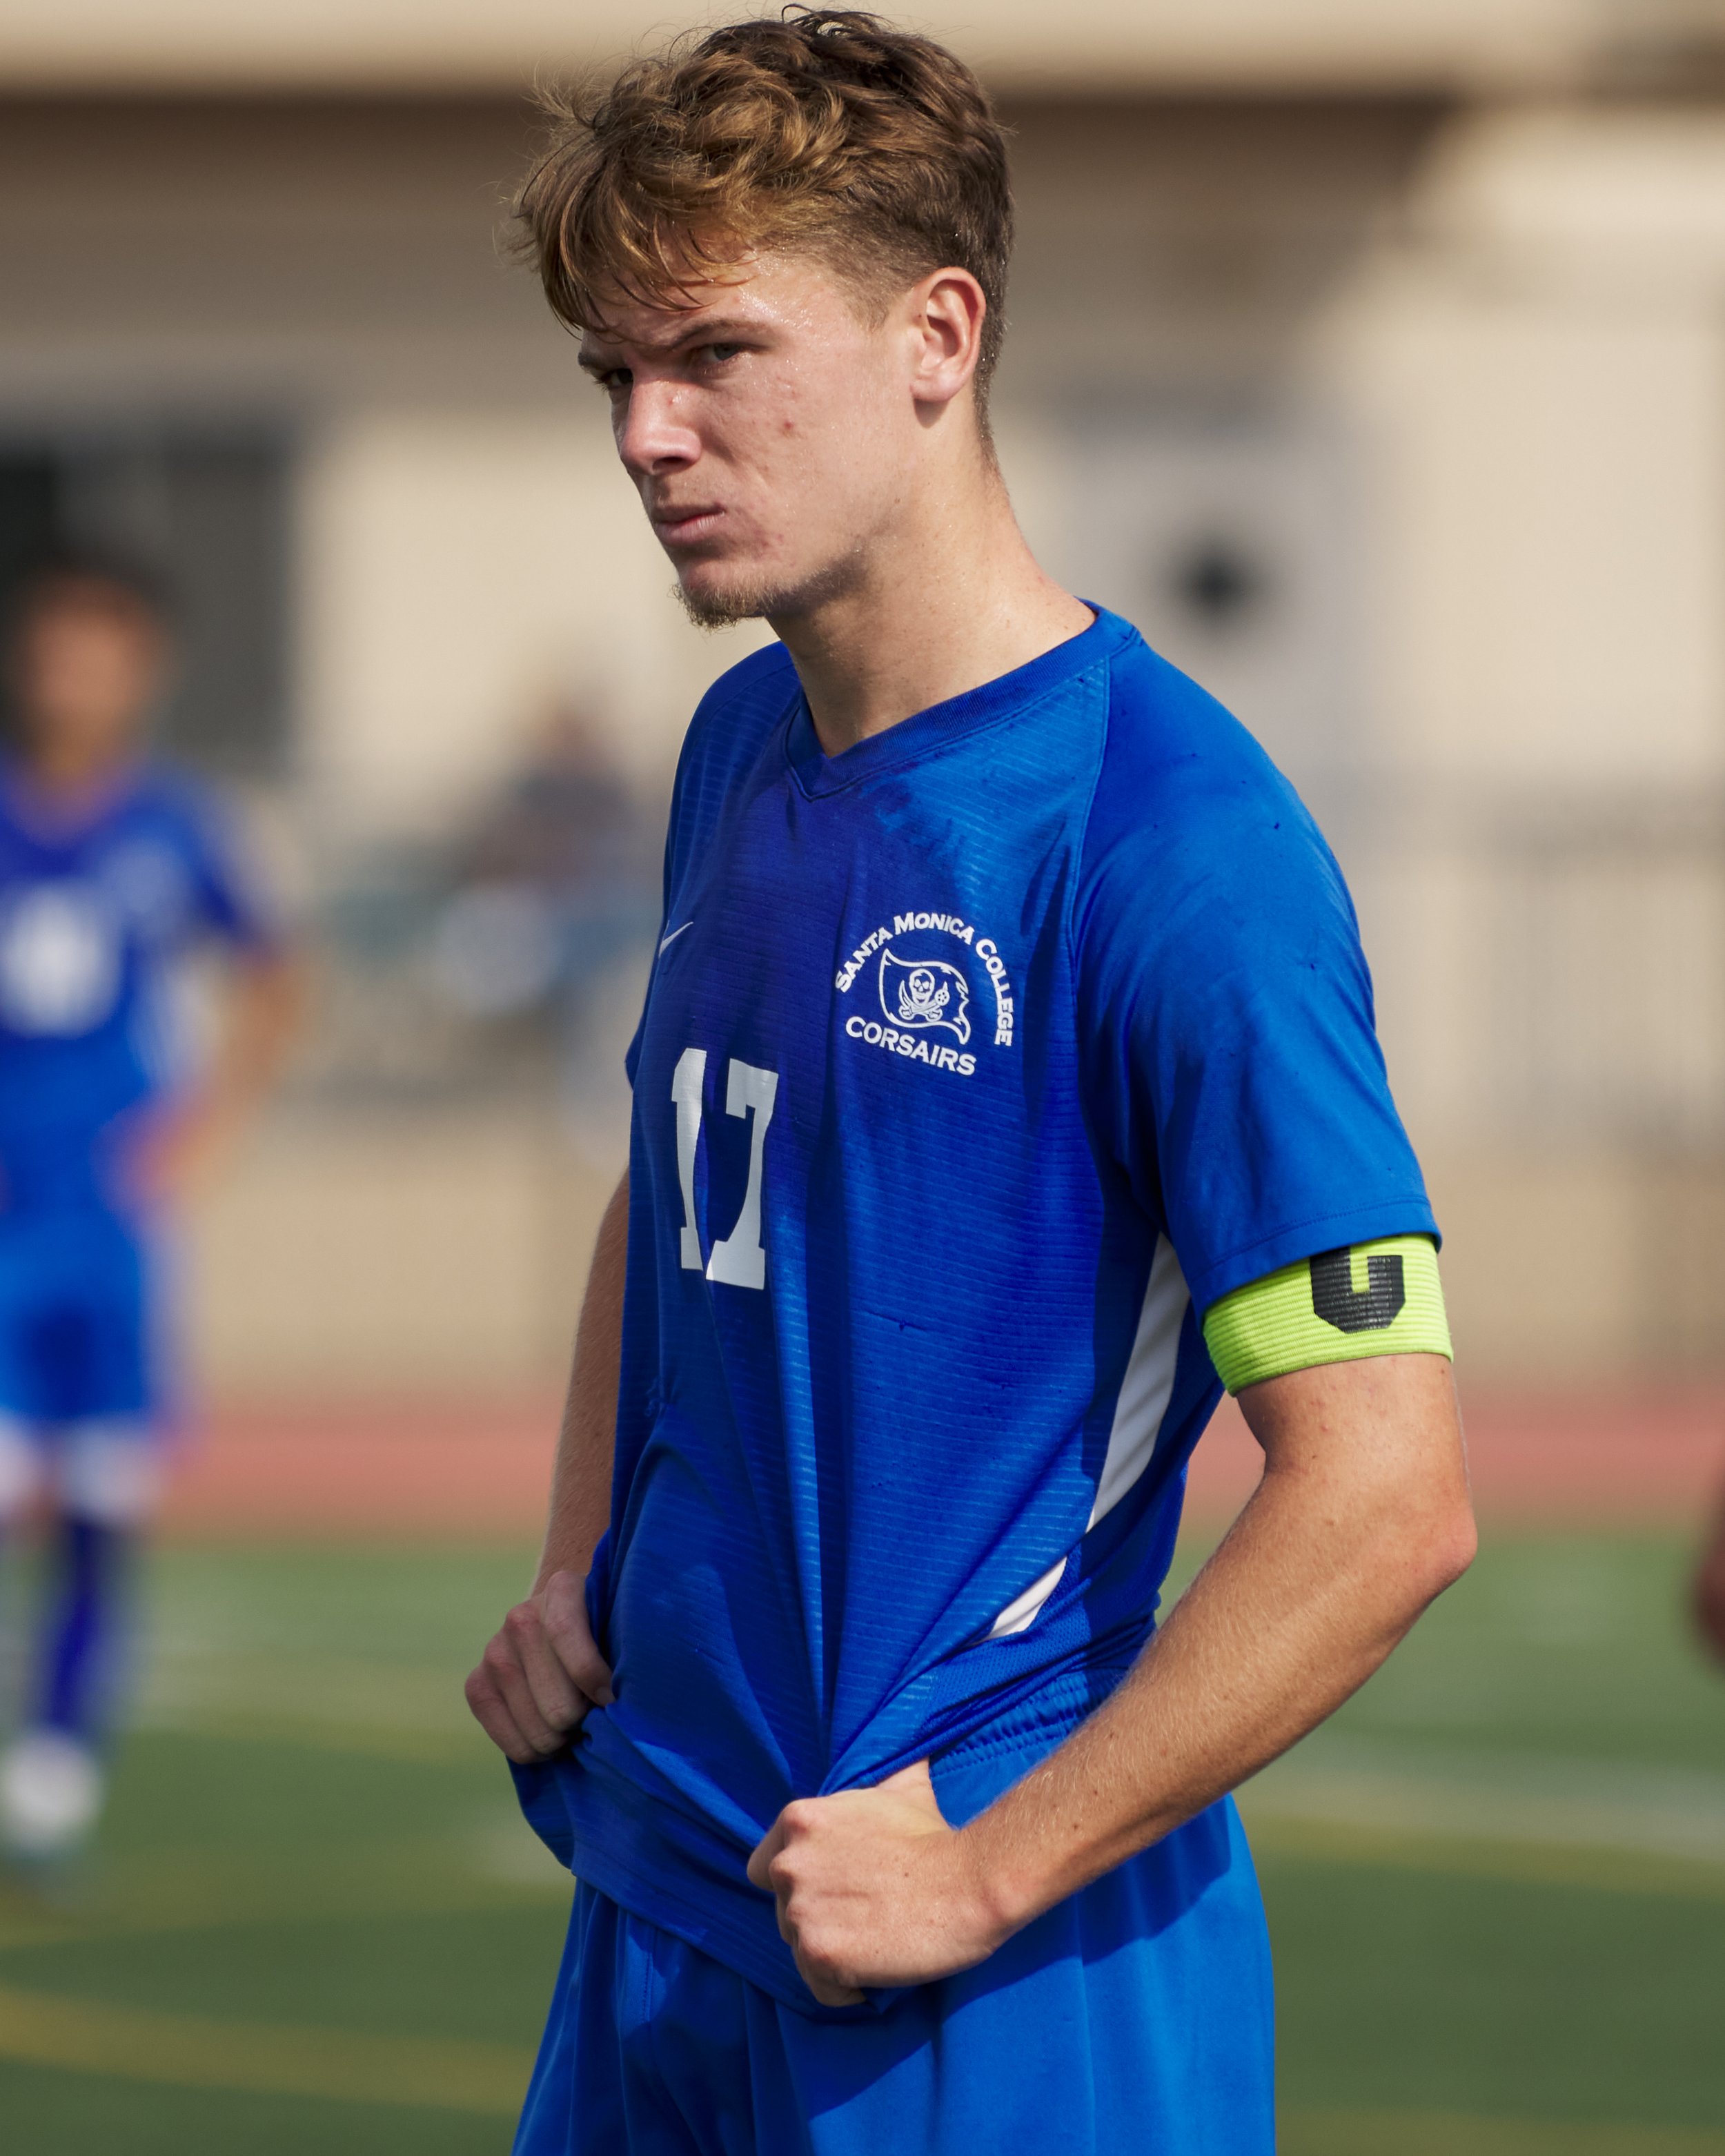  Santa Monica College Corsairs' Taj Winnard during the men's soccer match against the Los Angeles Mission College Eagles on Tuesday, Nov. 1, 2022, at Corsair Field in Santa Monica, Calif. The Corsairs won 3-0. (Nicholas McCall | The Corsair) 